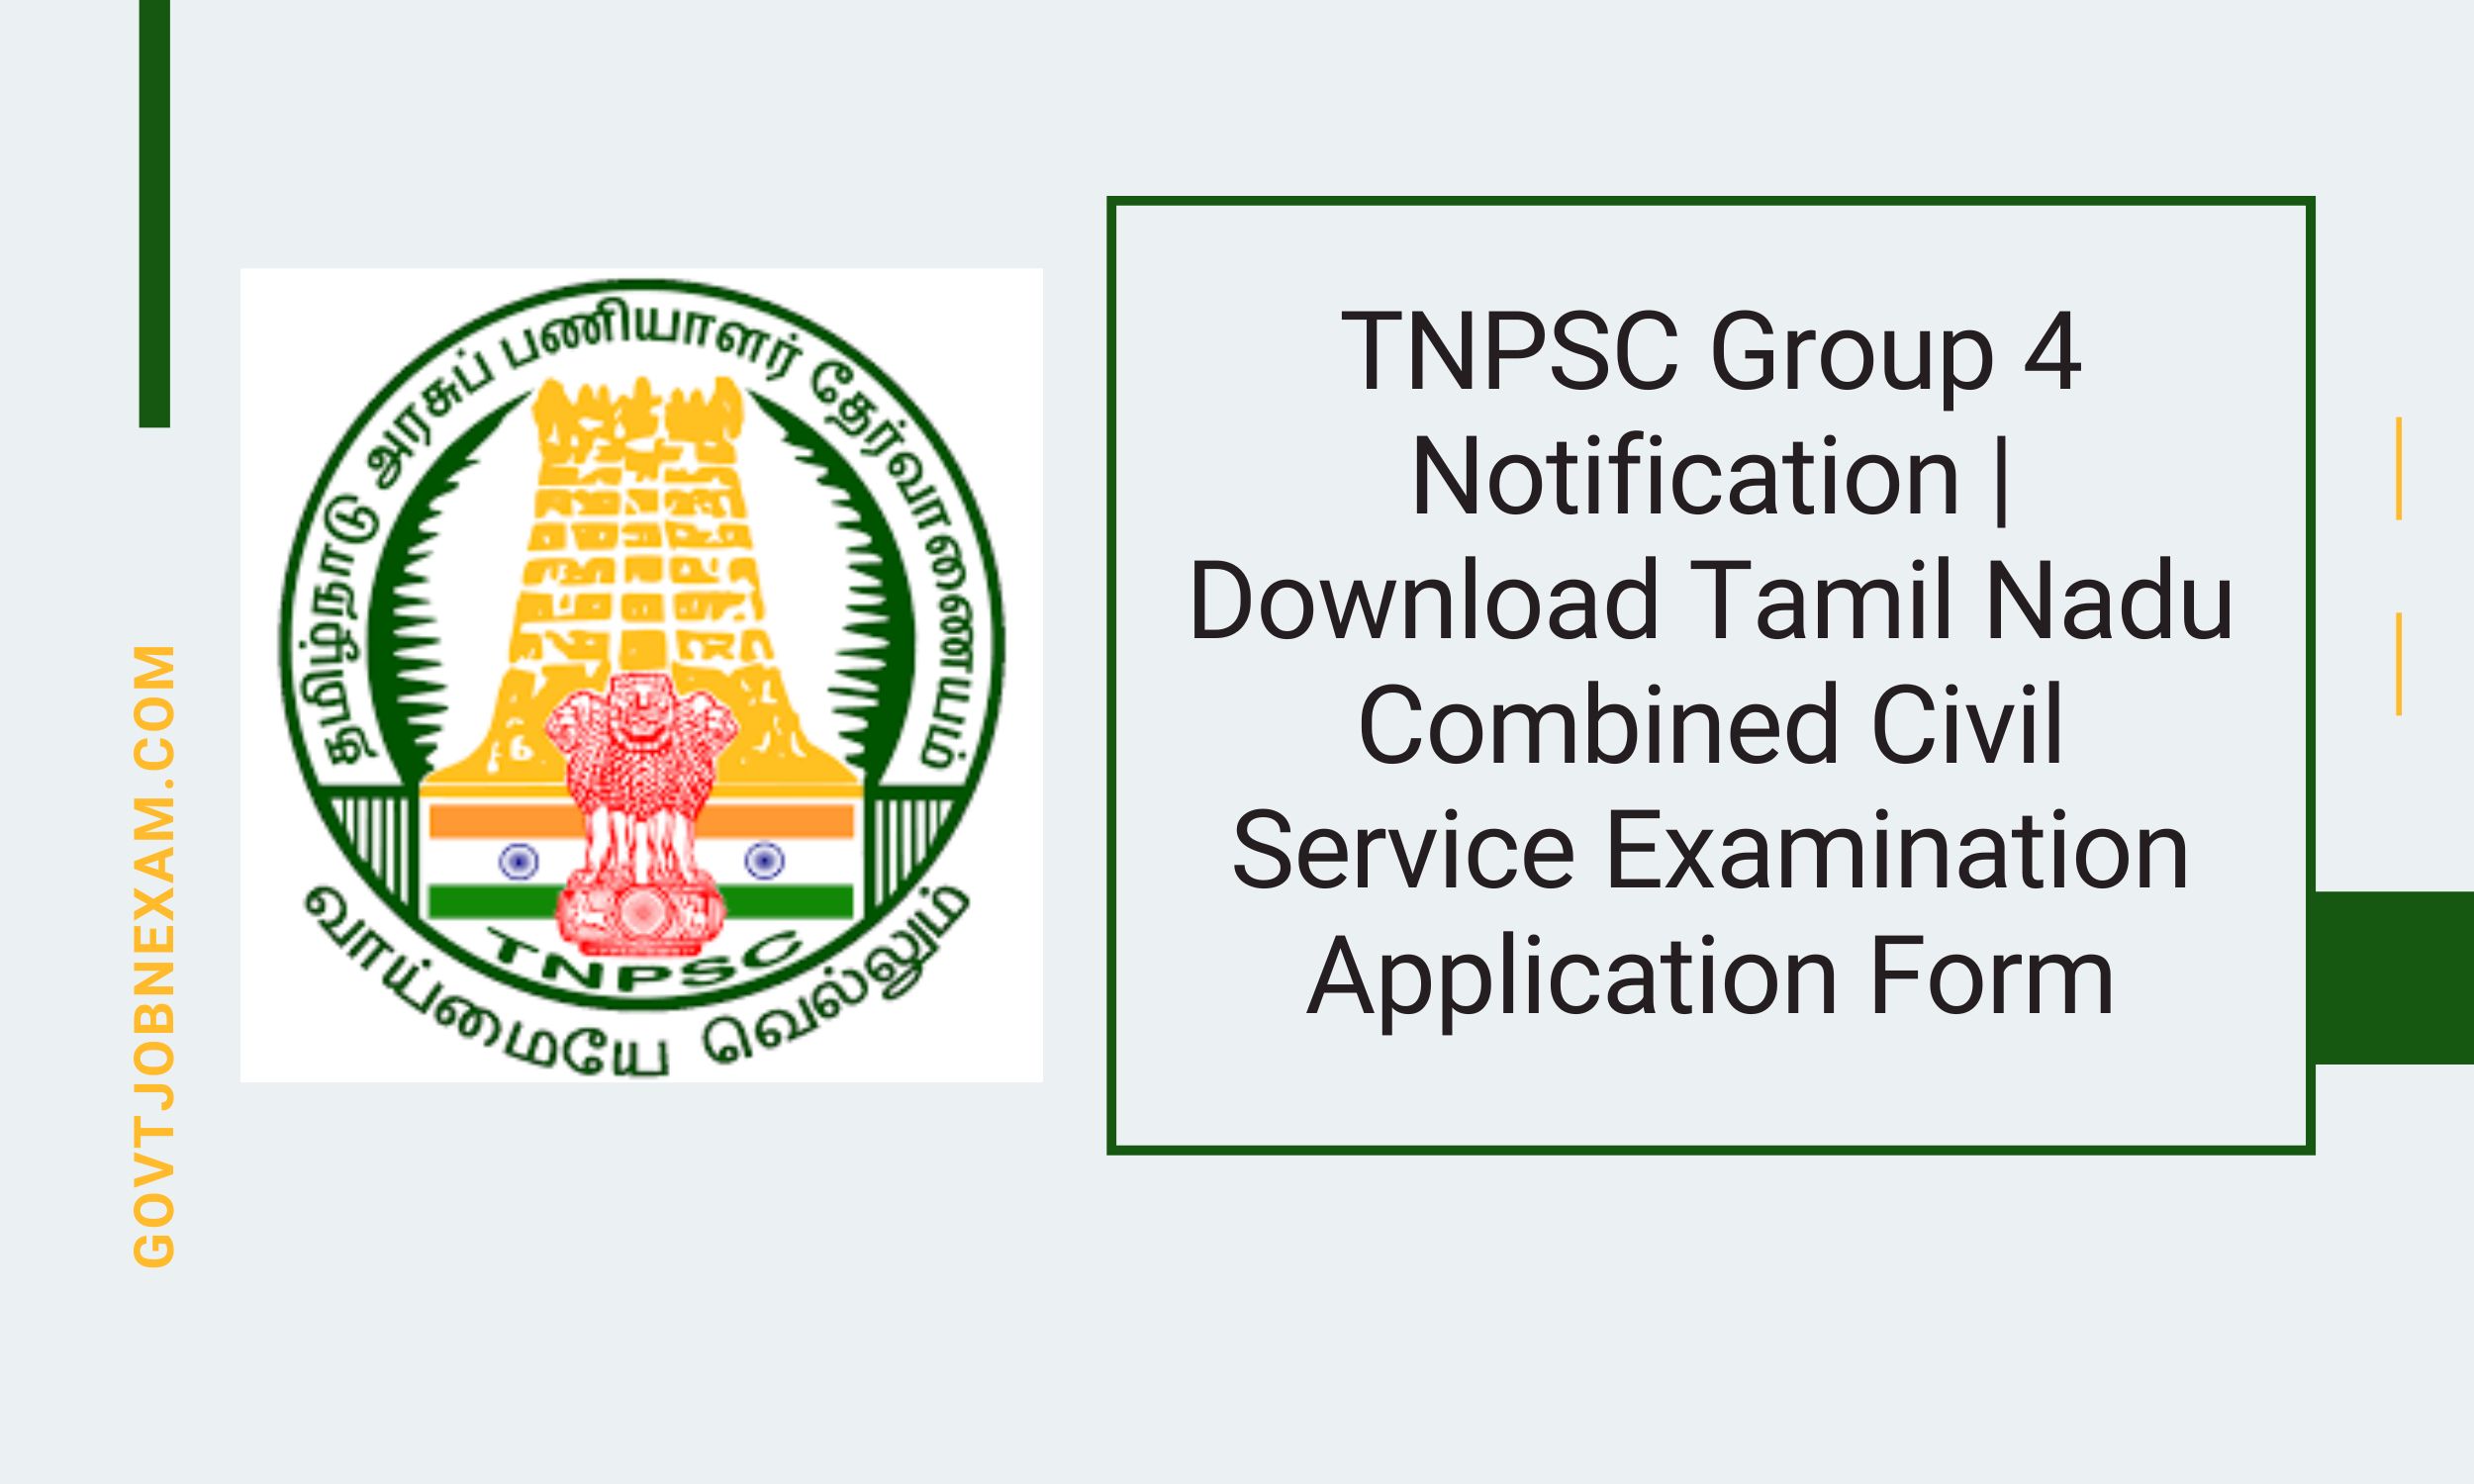 You are currently viewing TNPSC Group 4 Notification | Download Tamil Nadu Combined Civil Service Examination Application Form